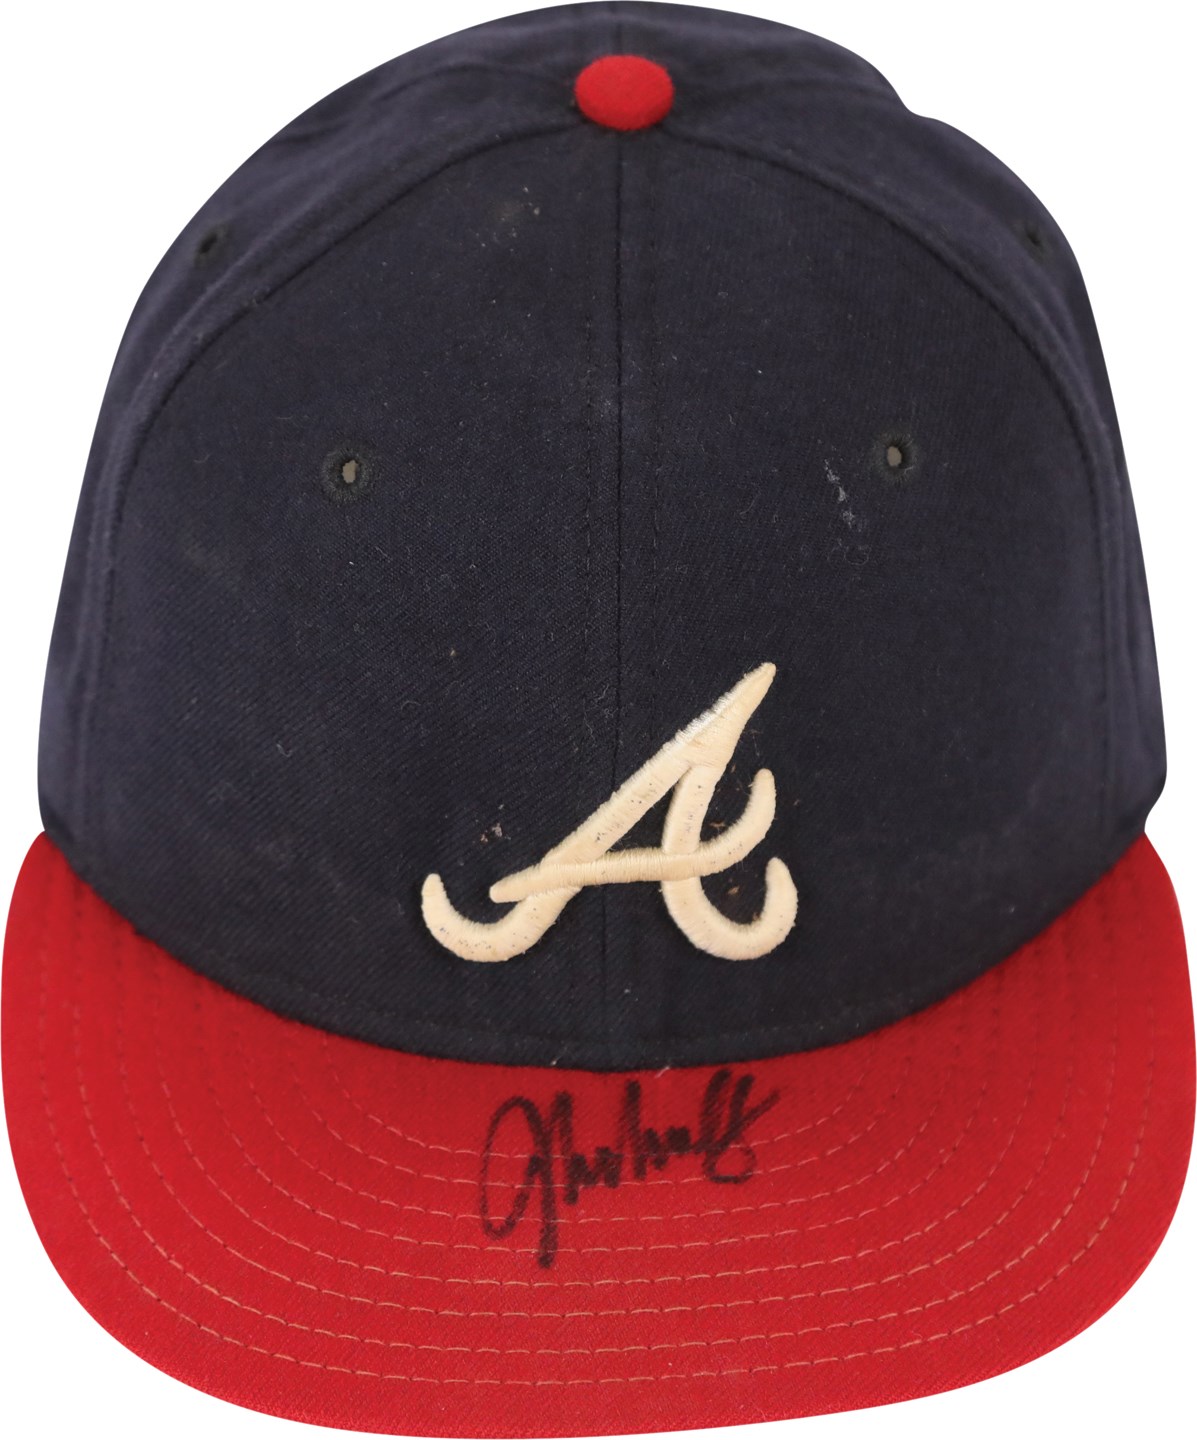 - 1997 John Smoltz Atlanta Braves Signed Game Used Hat Attributed to NLCS (Coach COA)